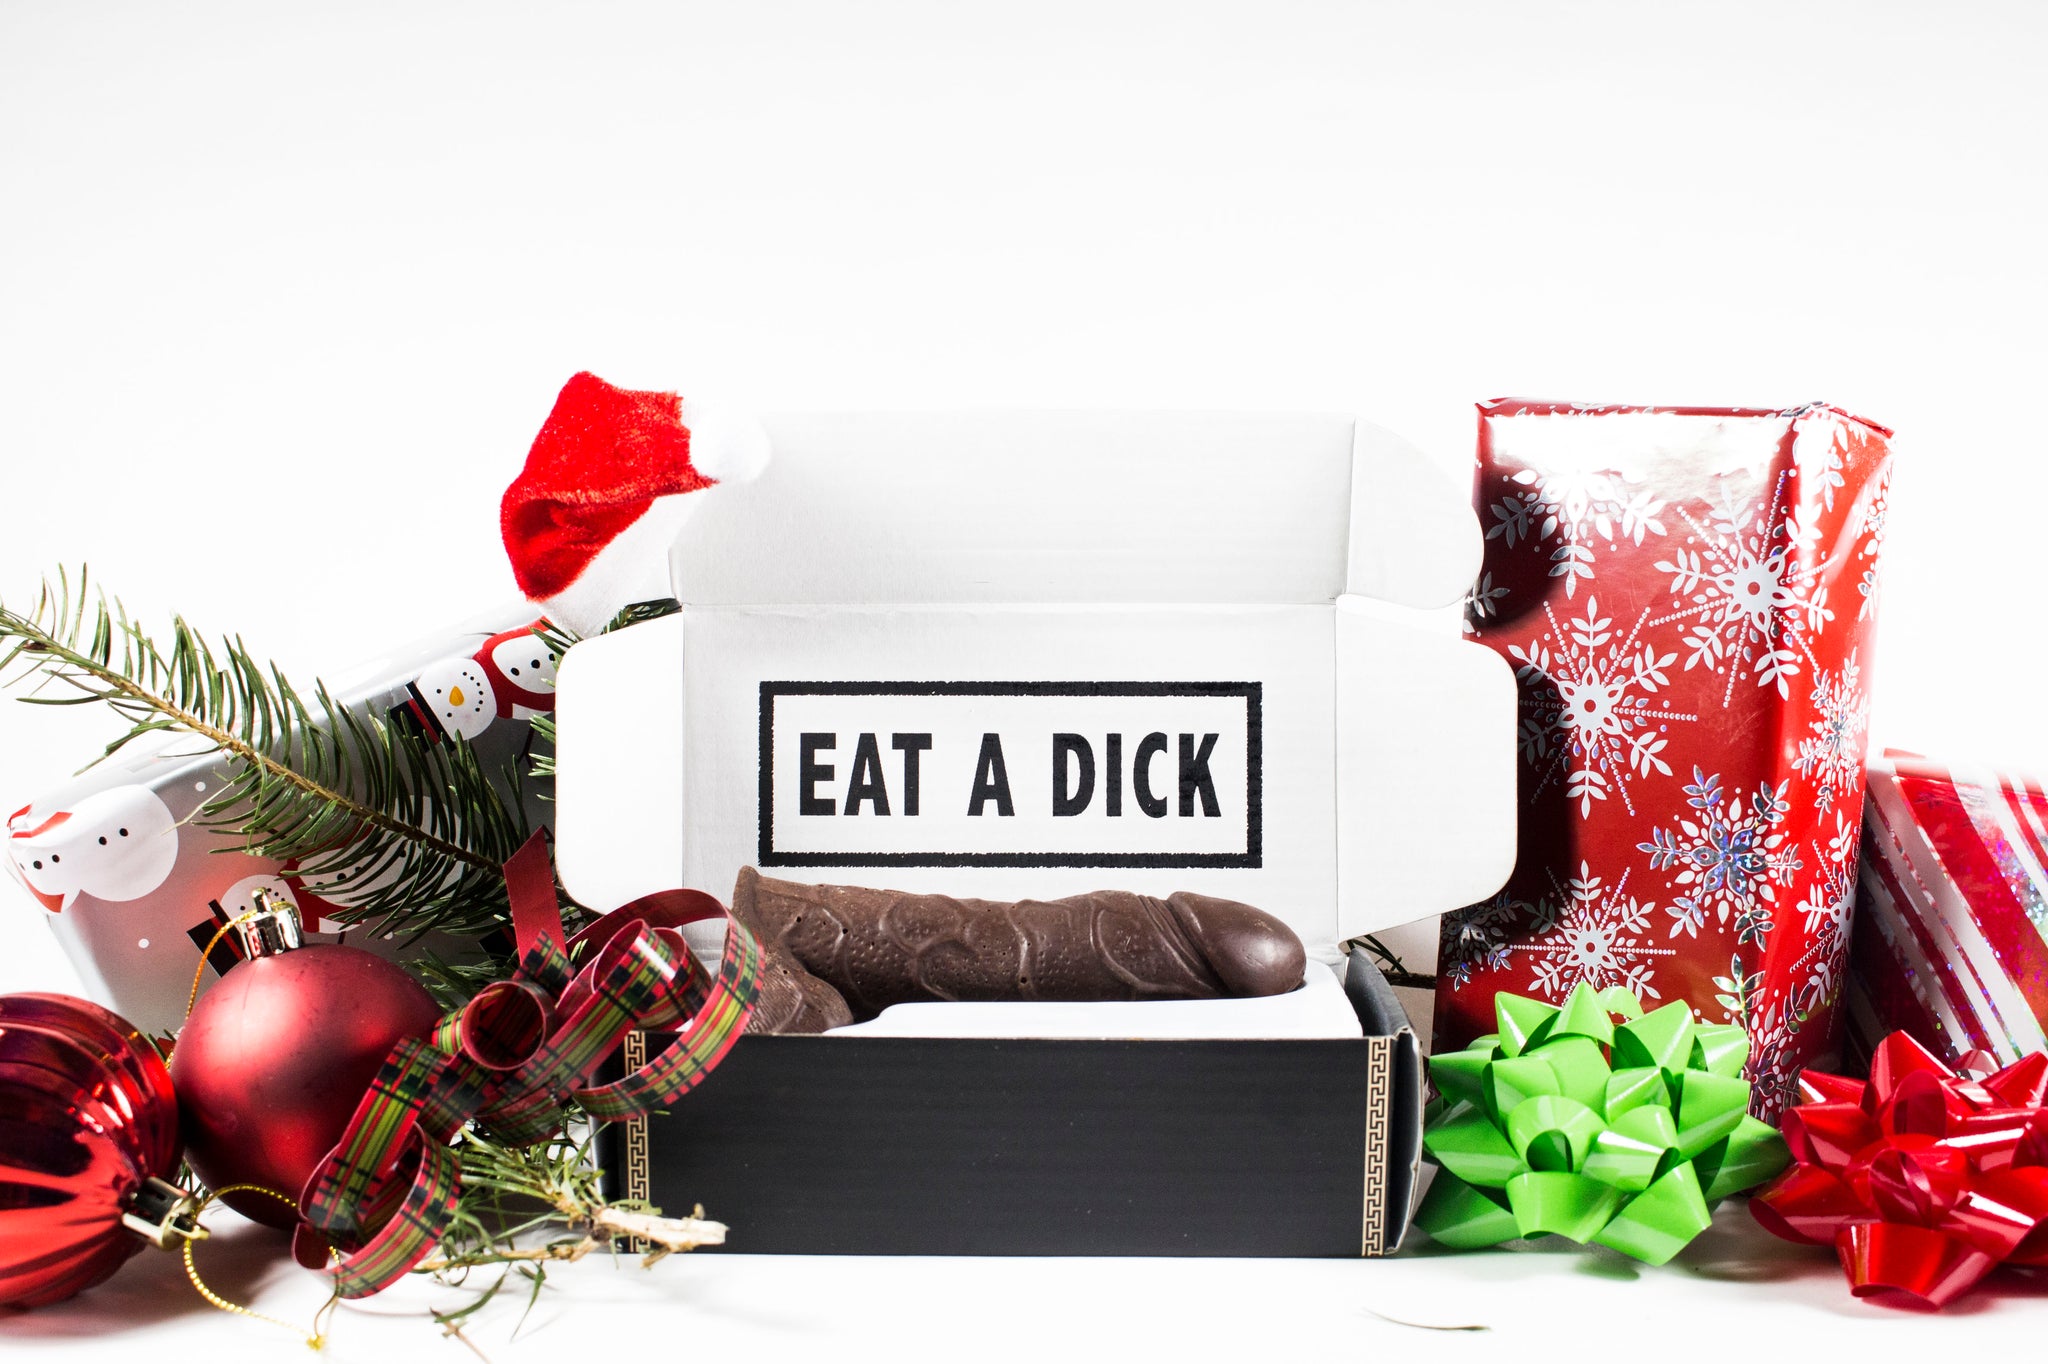 Christmas Dick Porn - Eat a Dick - The Christmas Dick - Dicks By Mail - Anonymously mail a bag of  dicks